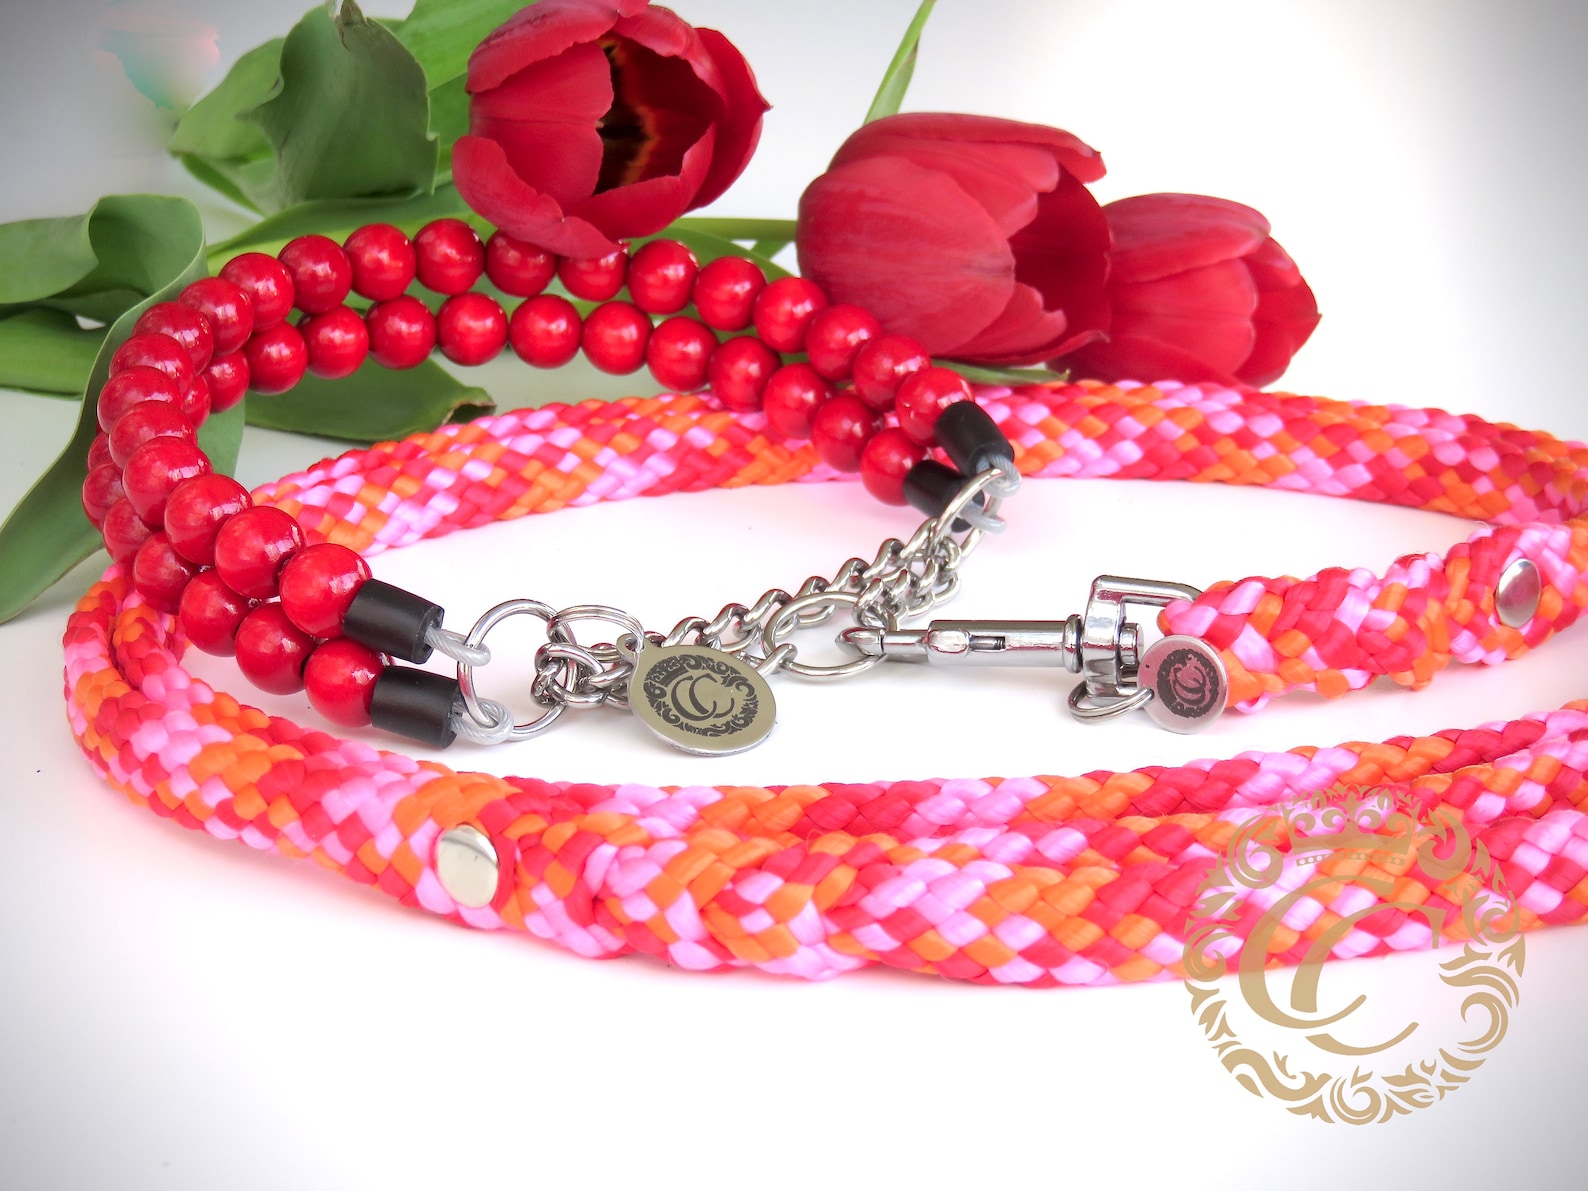 Dog leash for small & medium dogs Red Pink Orange | Paracord leashes | CollarCrafts | Dog leash paracord | washable leashes | leibanden | honden leibanden | Collars and leashes | CollarCrafts | red dog leash | dog lead | hondenleiband | honden leibandband | small leashes | ppm leashes | custom made leashes